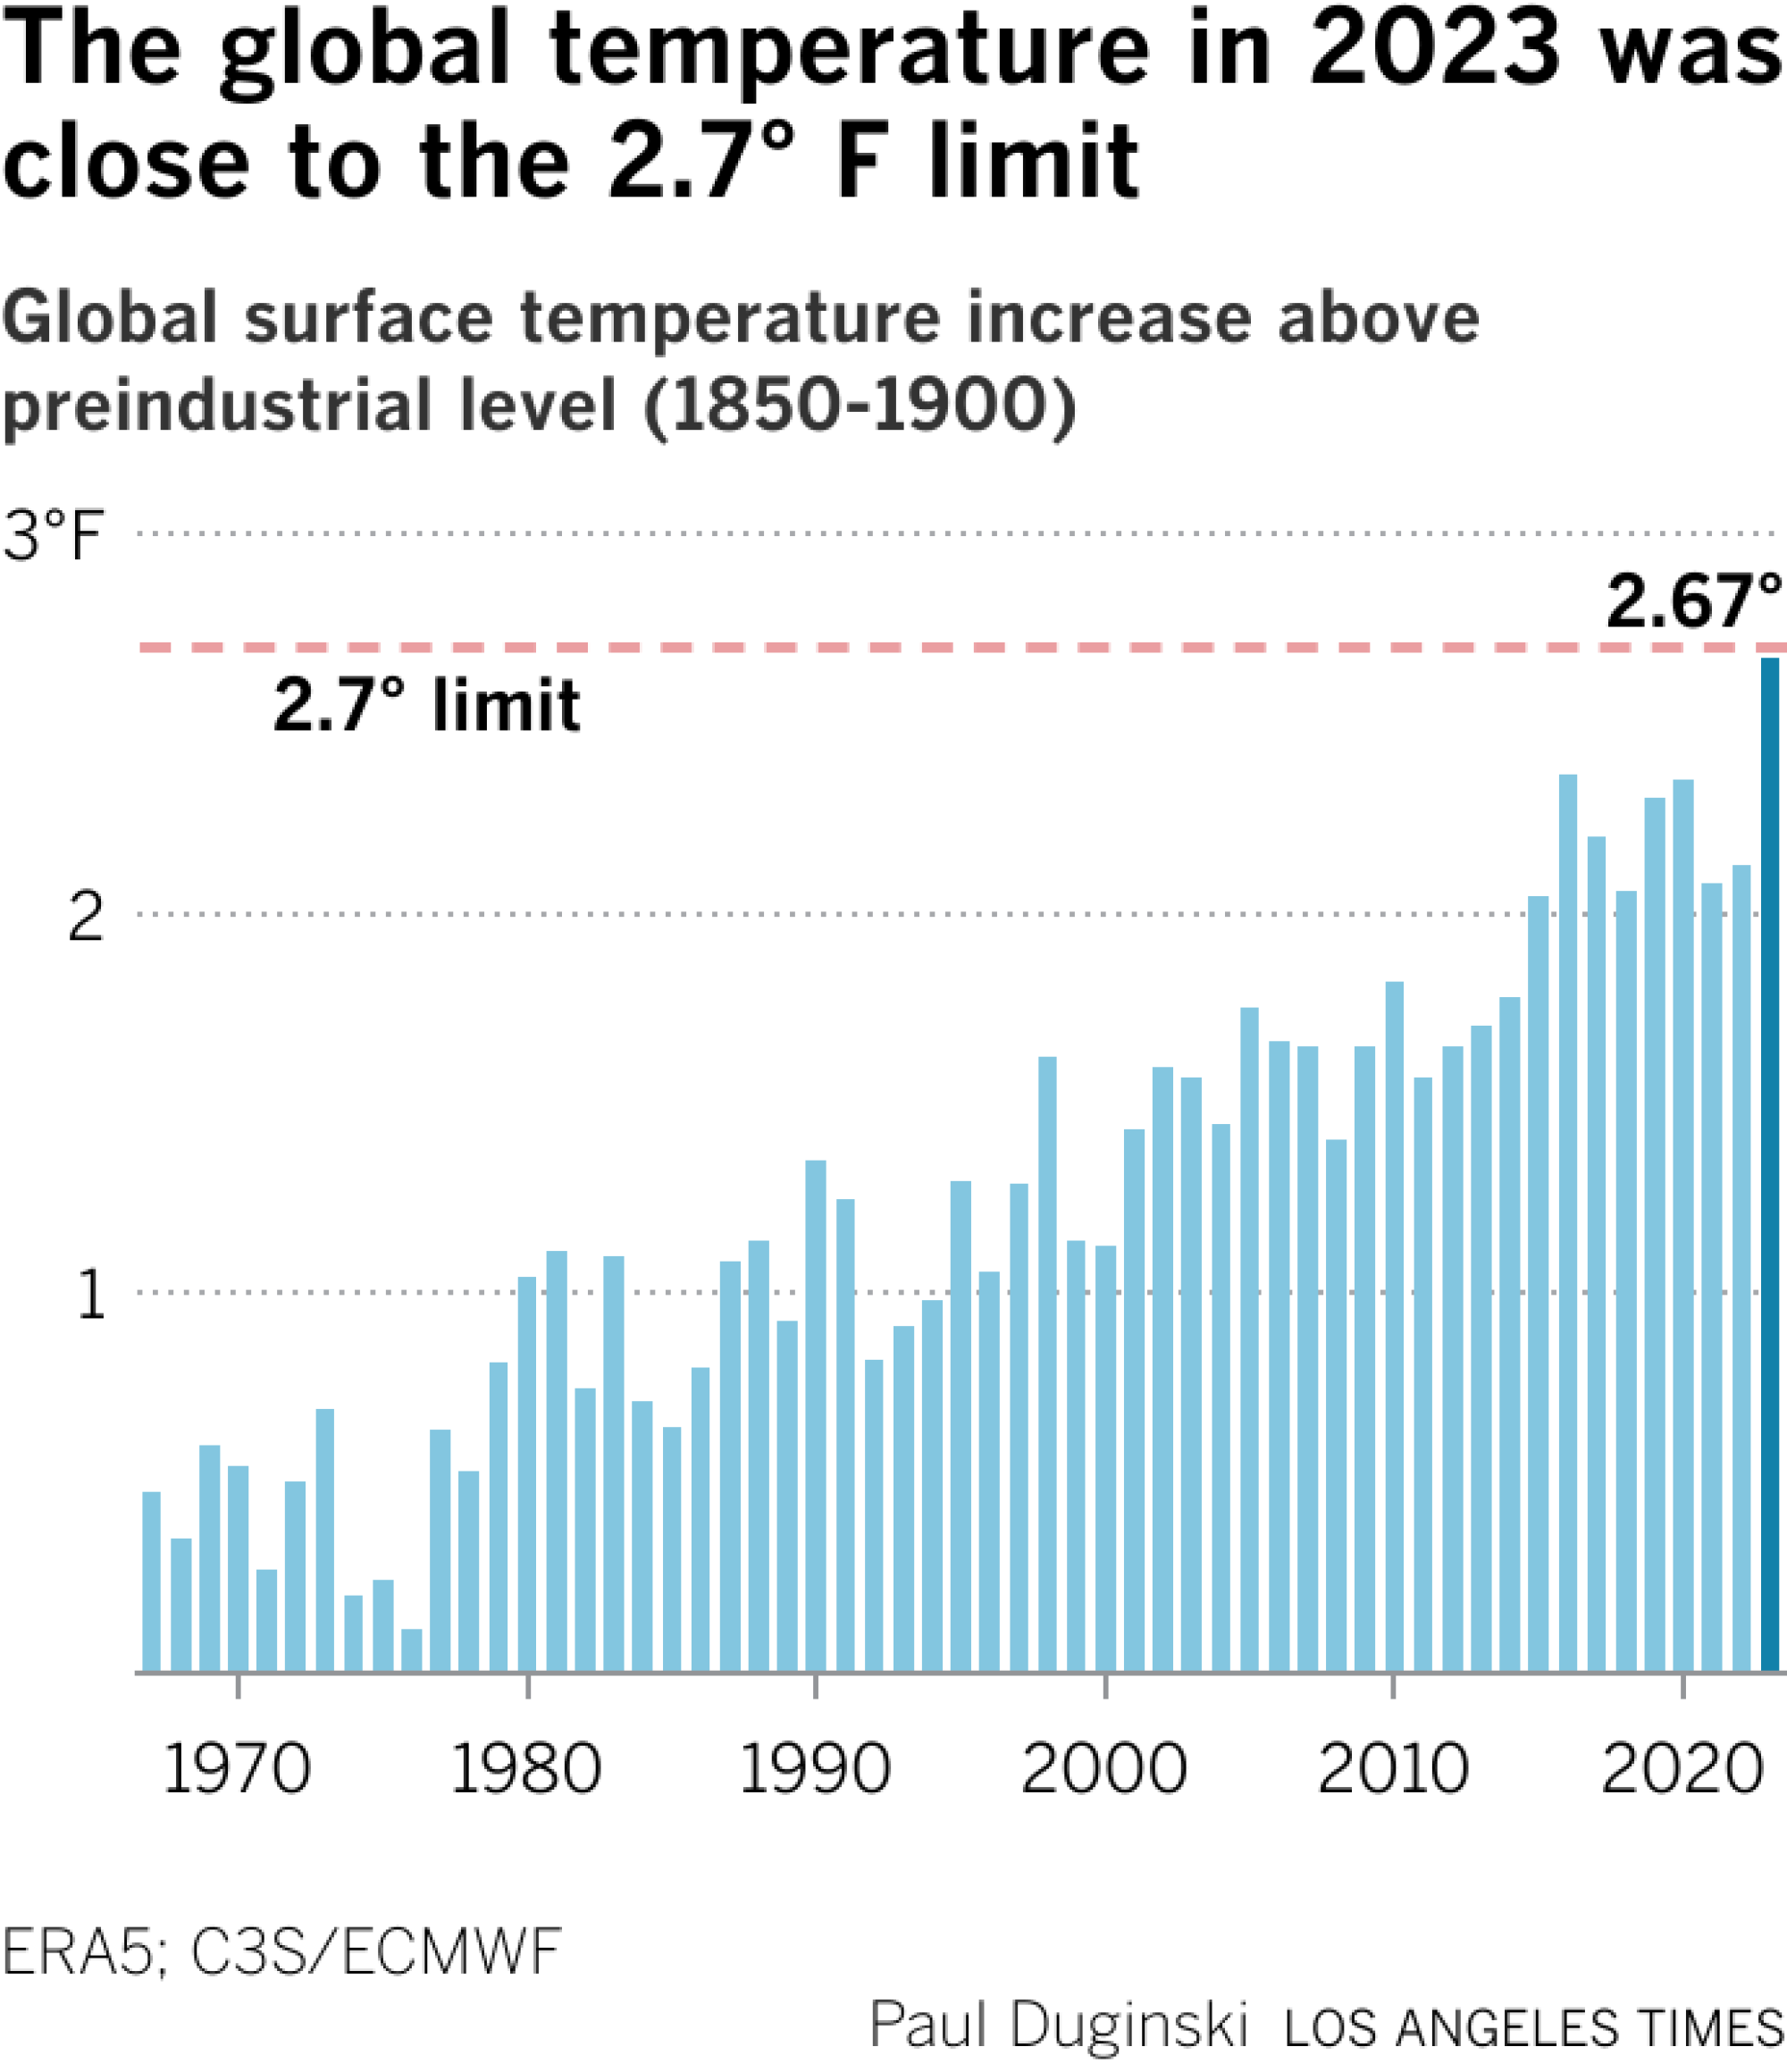 Bar chart shows a steady rise in temperature since 1967. In 2023, the earth was 2.67 degrees Fahrenheit warmer than the preindustrial average and 0.03 degrees below the 2.7 warming limit.